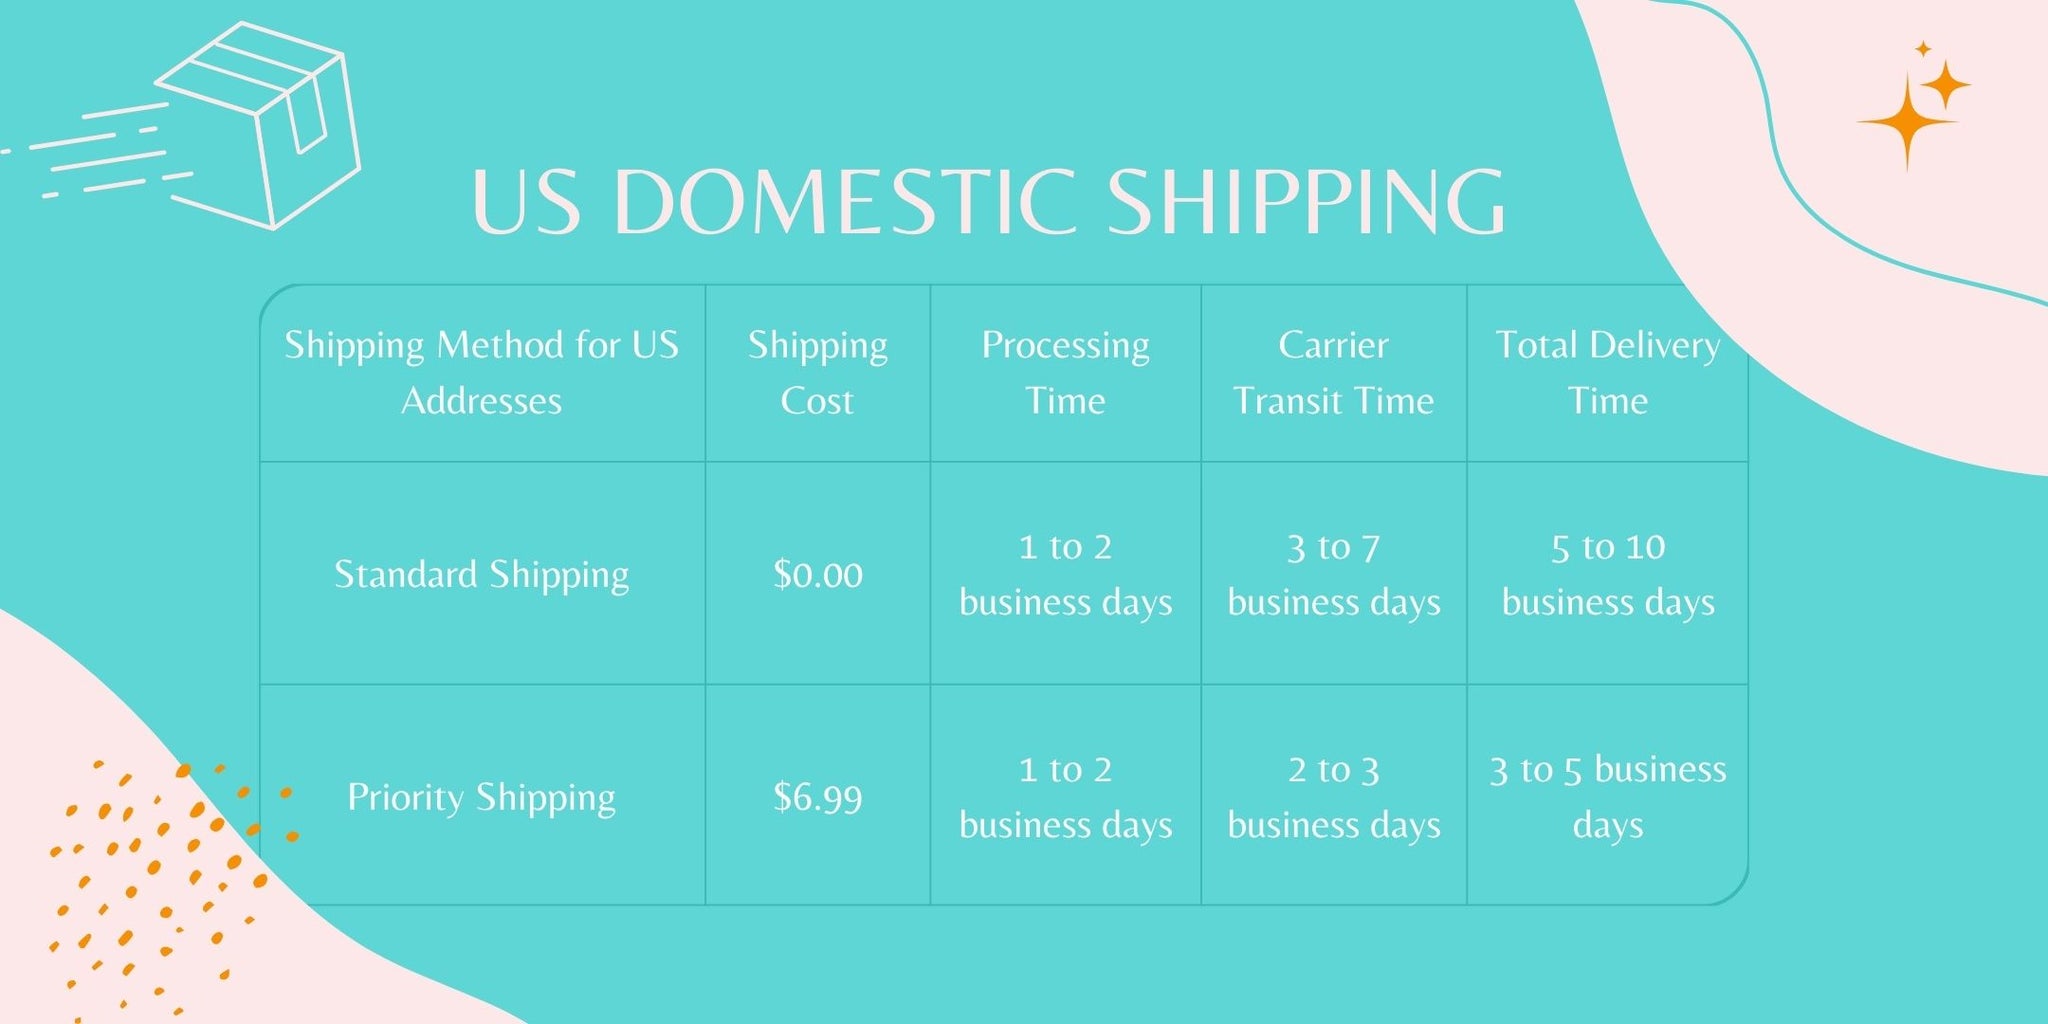 Shipping Method for US Addresses	Shipping Cost	Processing Time	Carrier Transit Time	Total Delivery Time Standard Shipping	$0.00	1 to 2 business days	3 to 7 business days	5 to 10 business days Priority Shipping	$6.99	1 to 2 business days	2 to 3 business days	3 to 5 business days